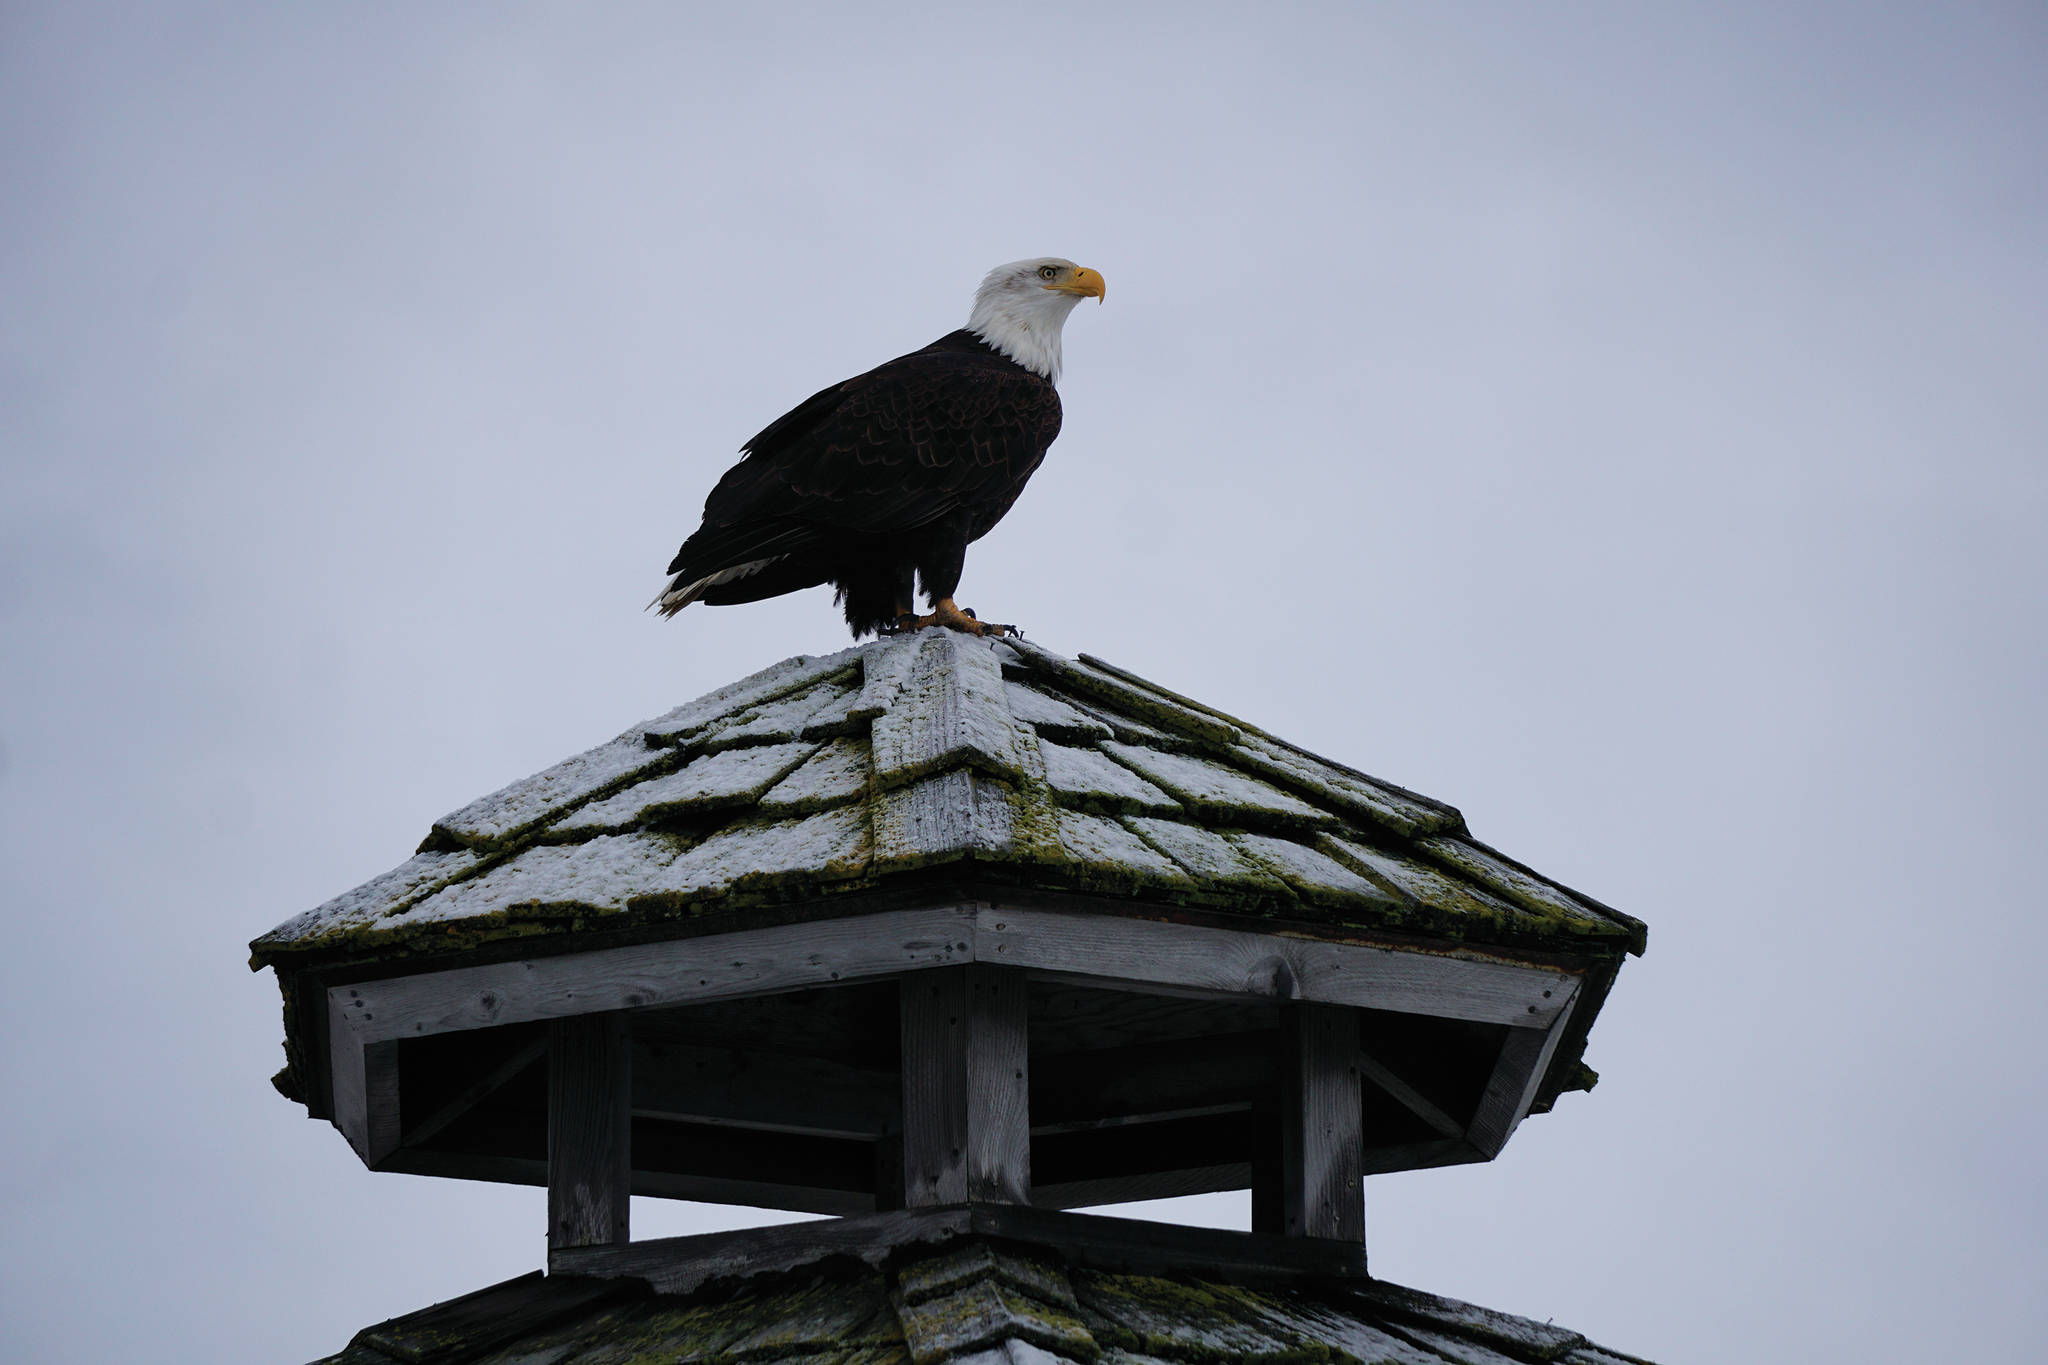 A bald eagle sits on top of the gazebo at Mariner Park on Thursday, Dec. 24, 2020, on the Homer Spit in Homer, Alaska. (Photo by Michael Armstrong/Homer News)